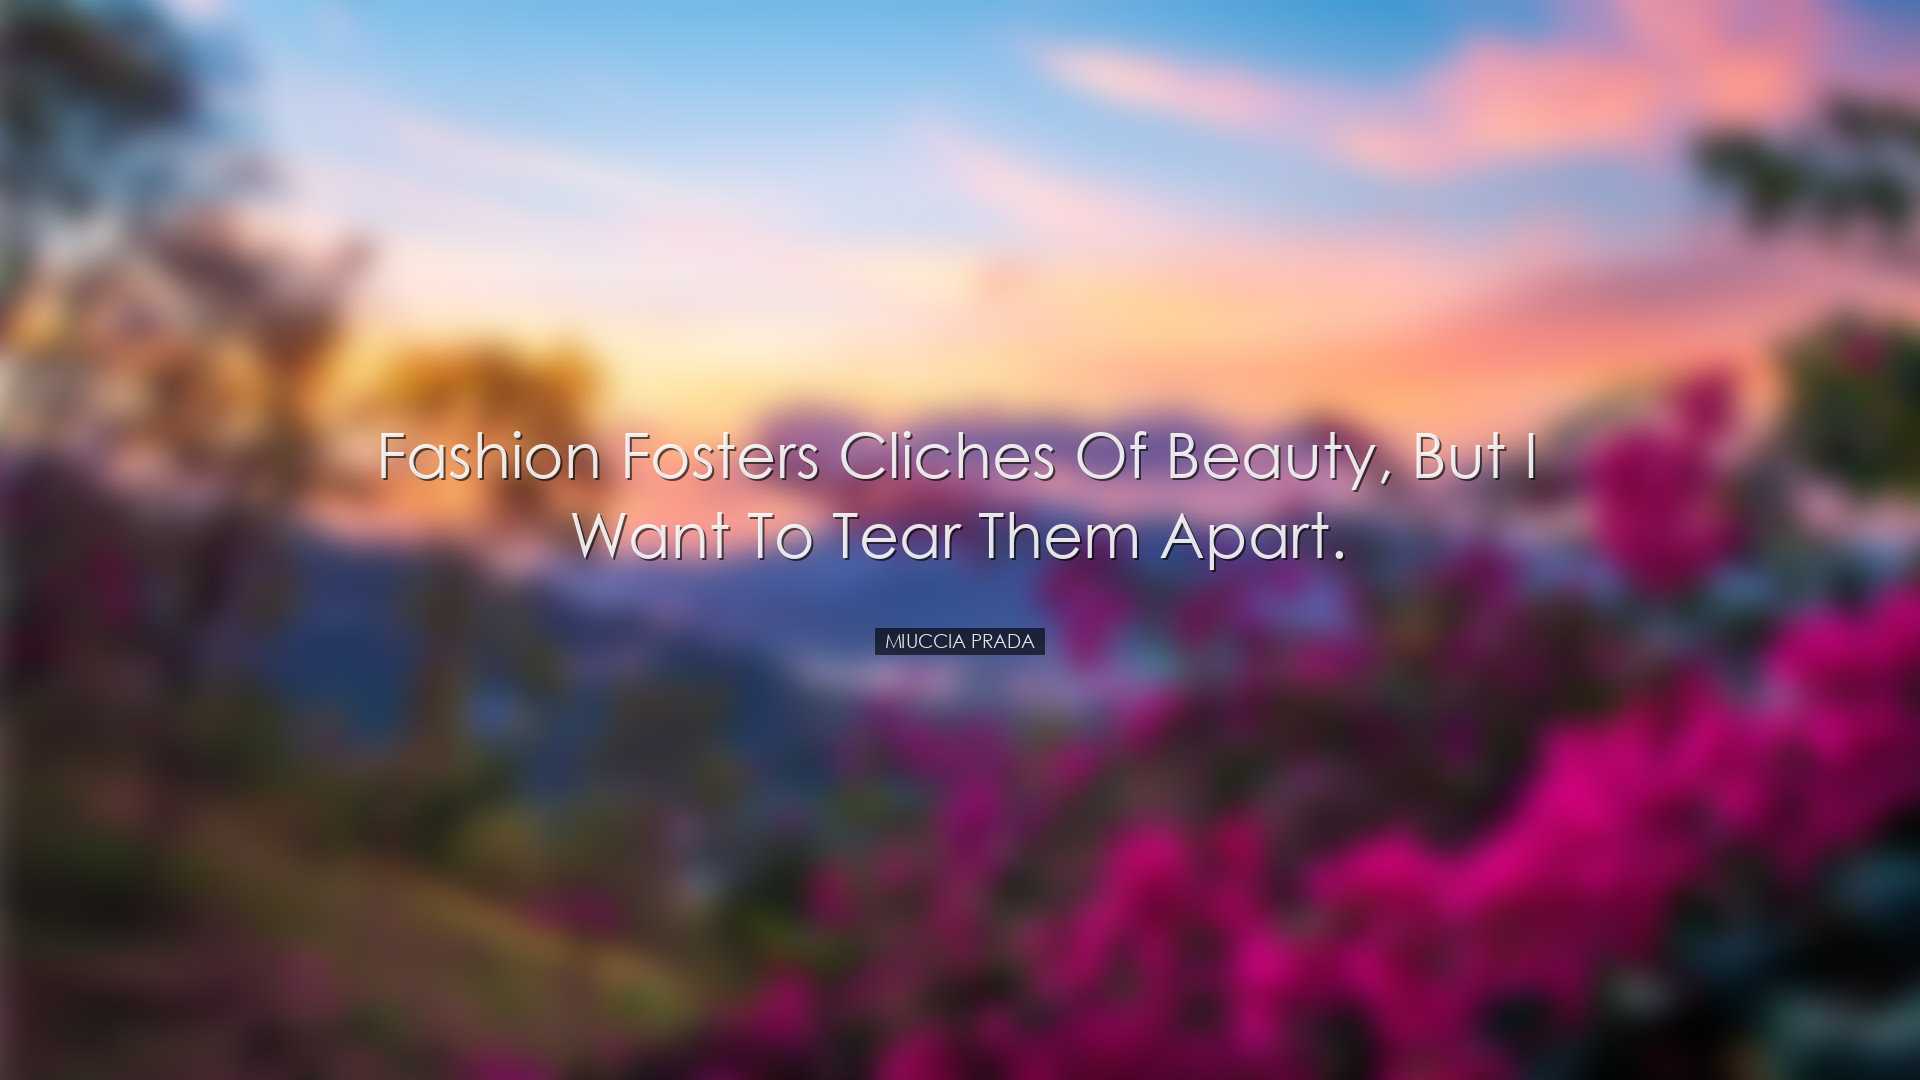 Fashion fosters cliches of beauty, but I want to tear them apart.